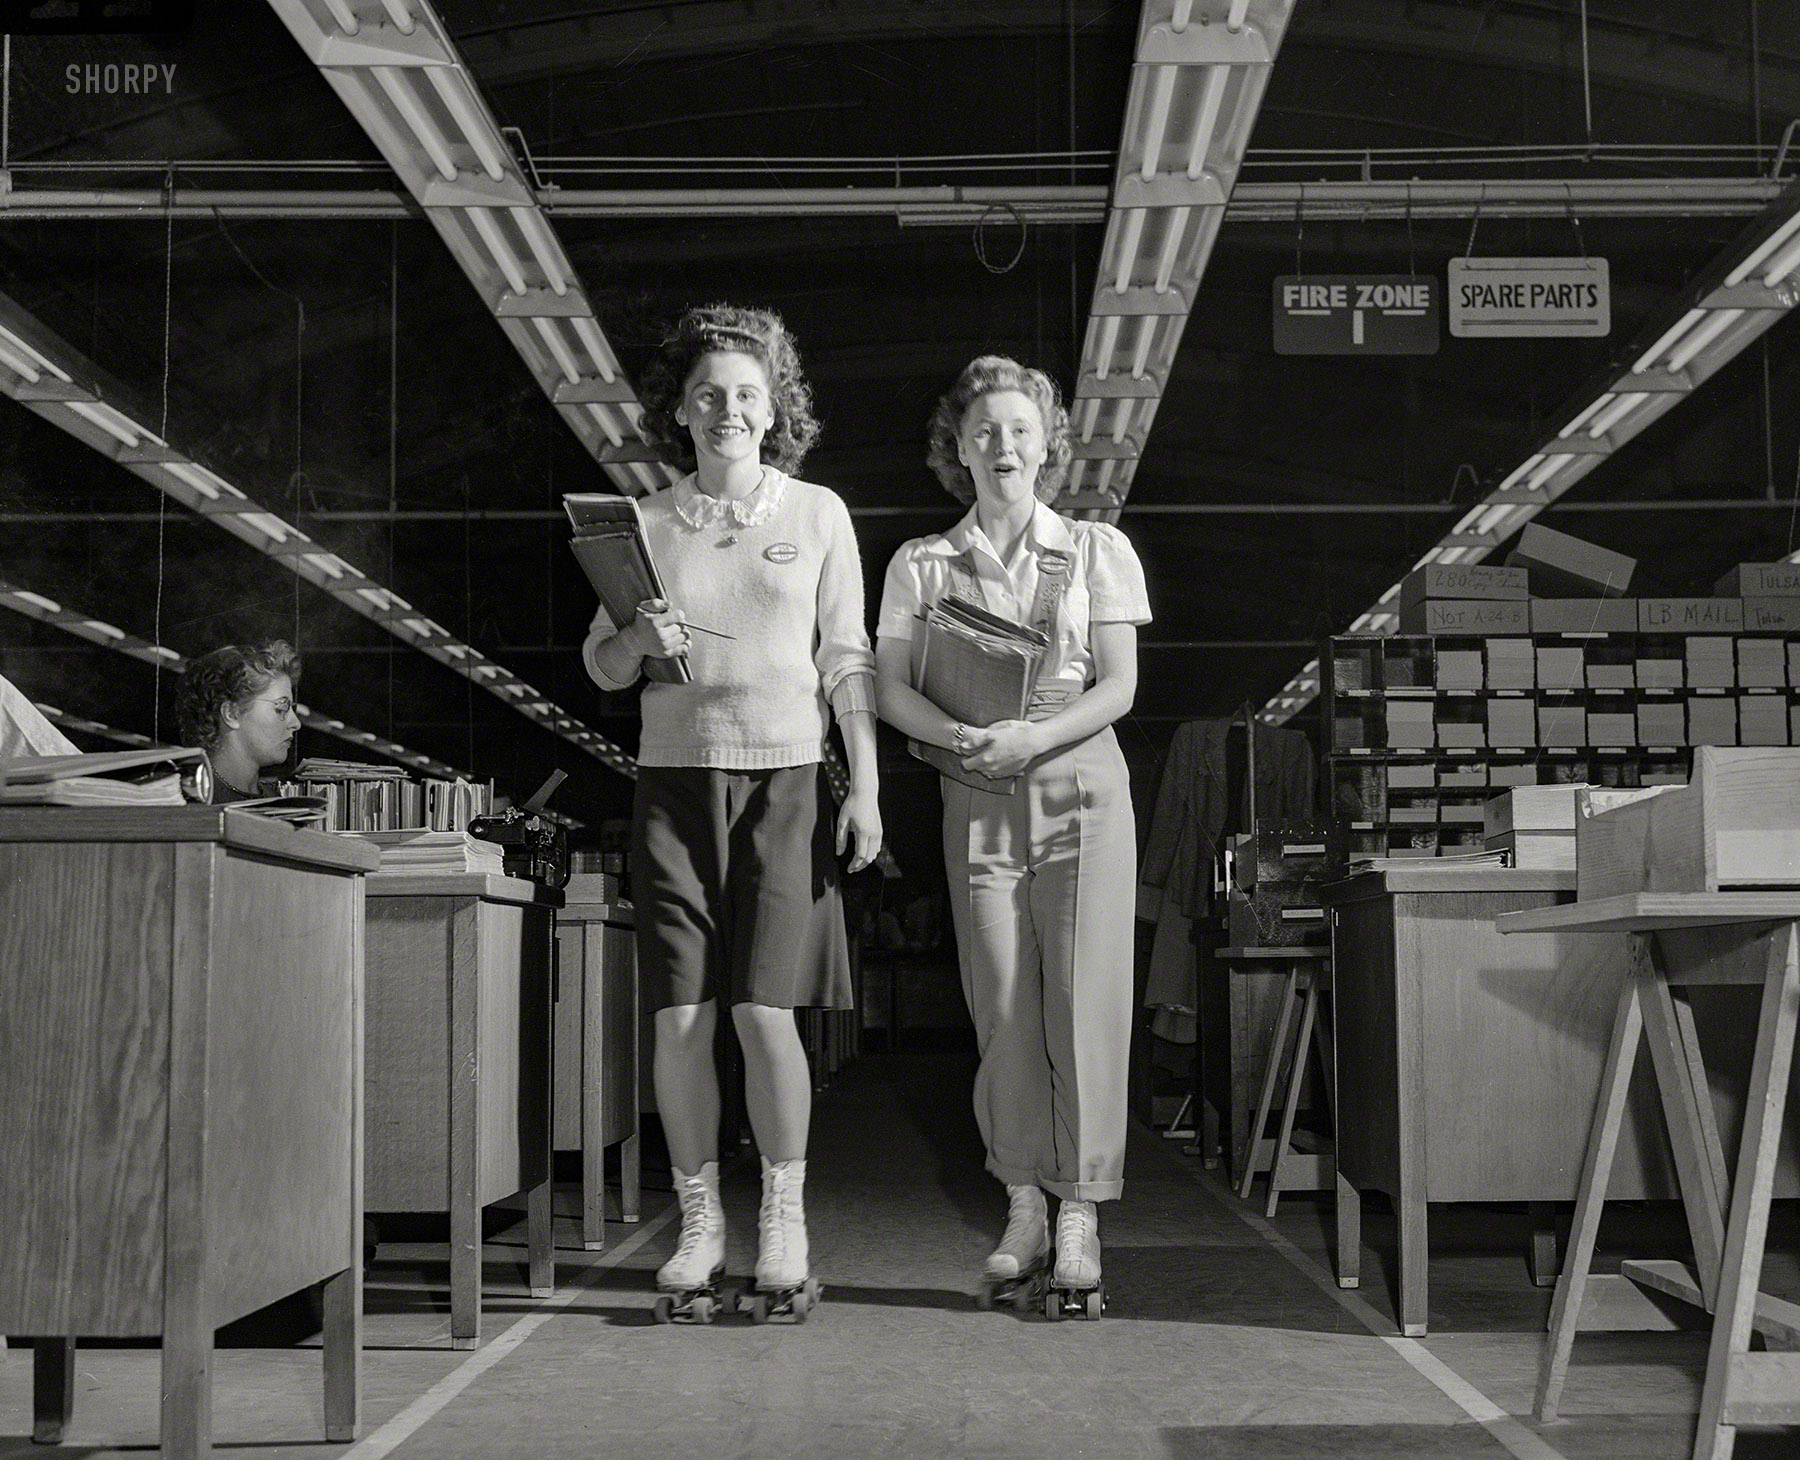 February 1943. "Girls on wheels expedite aircraft production. Literally helping to speed the war effort, Dolores Richardson and Geneva Carpenter are 'expeditors' at Douglas Aircraft in El Segundo, California, where they deliver inter-departmental messages on roller skates." Medium format acetate negative by Ann Rosener for the Office of War Information. View full size.